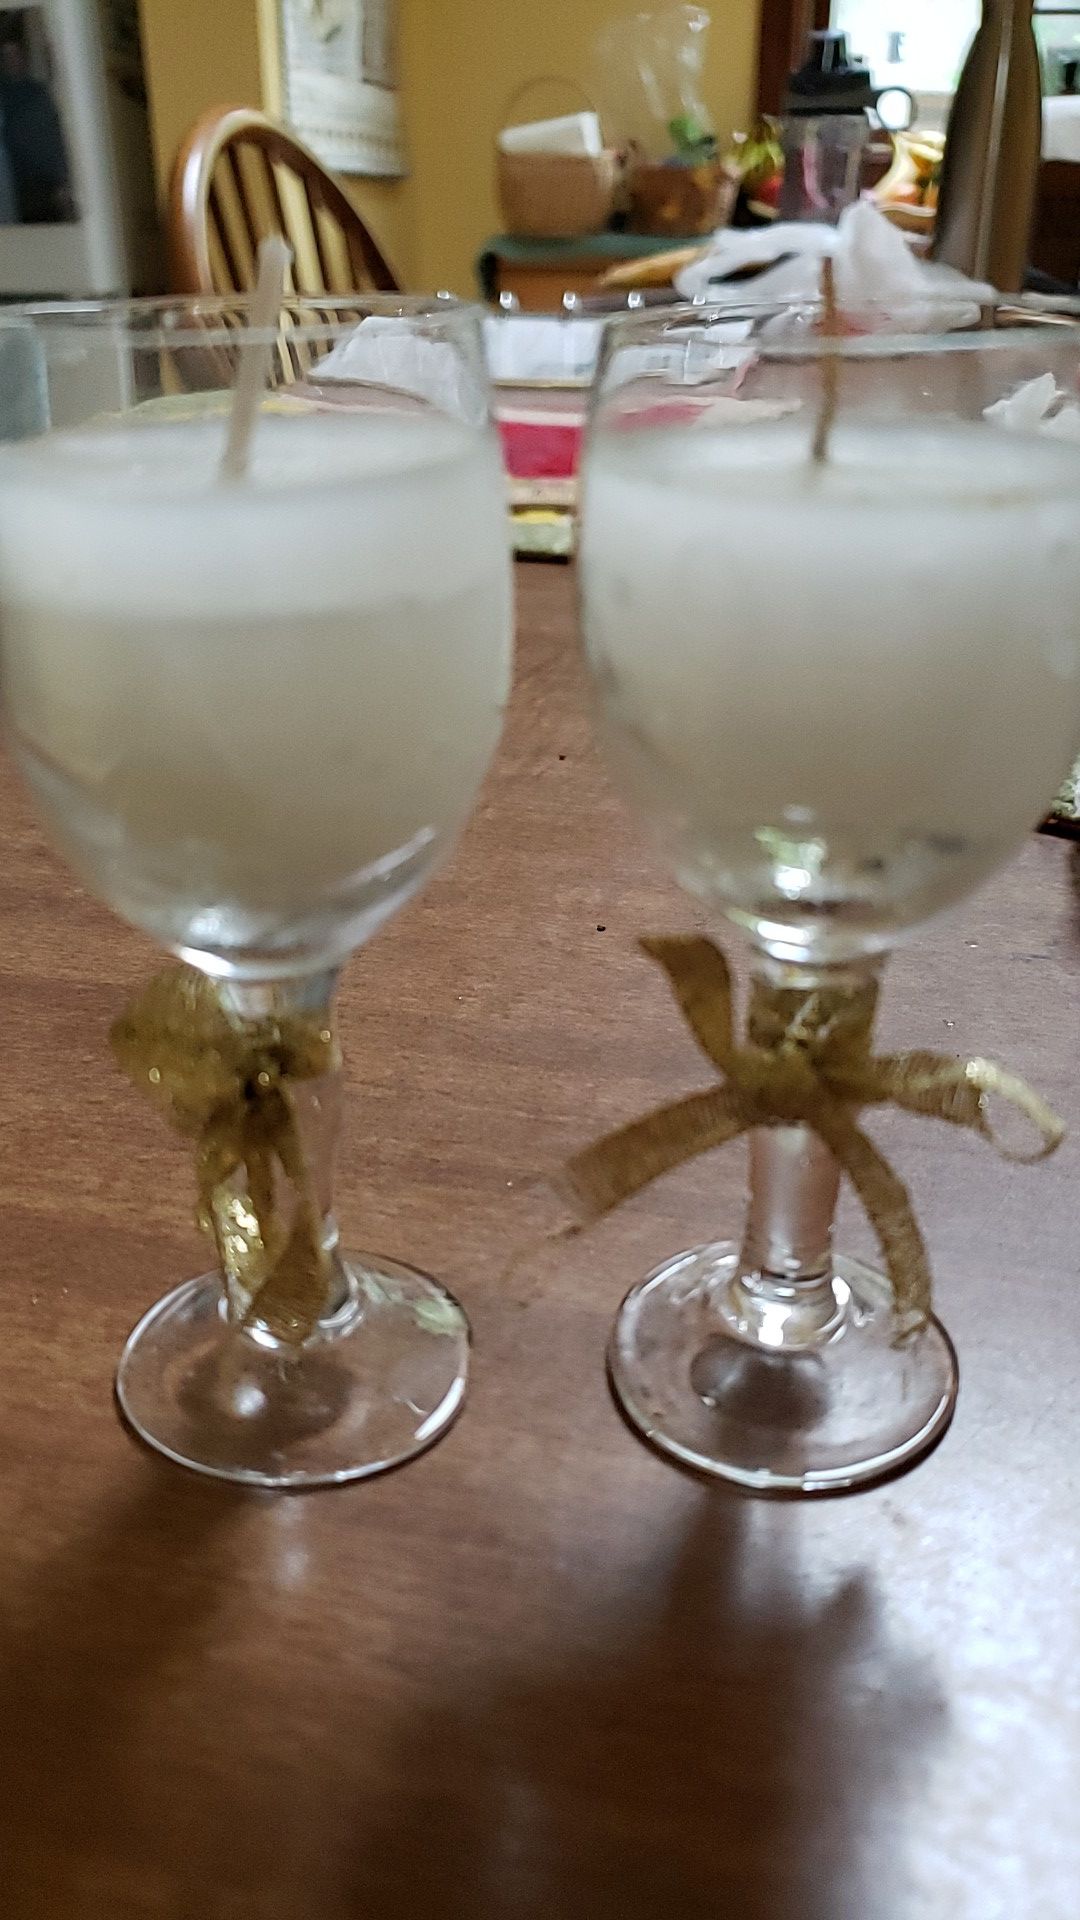 To little pretty candles in wine glasses